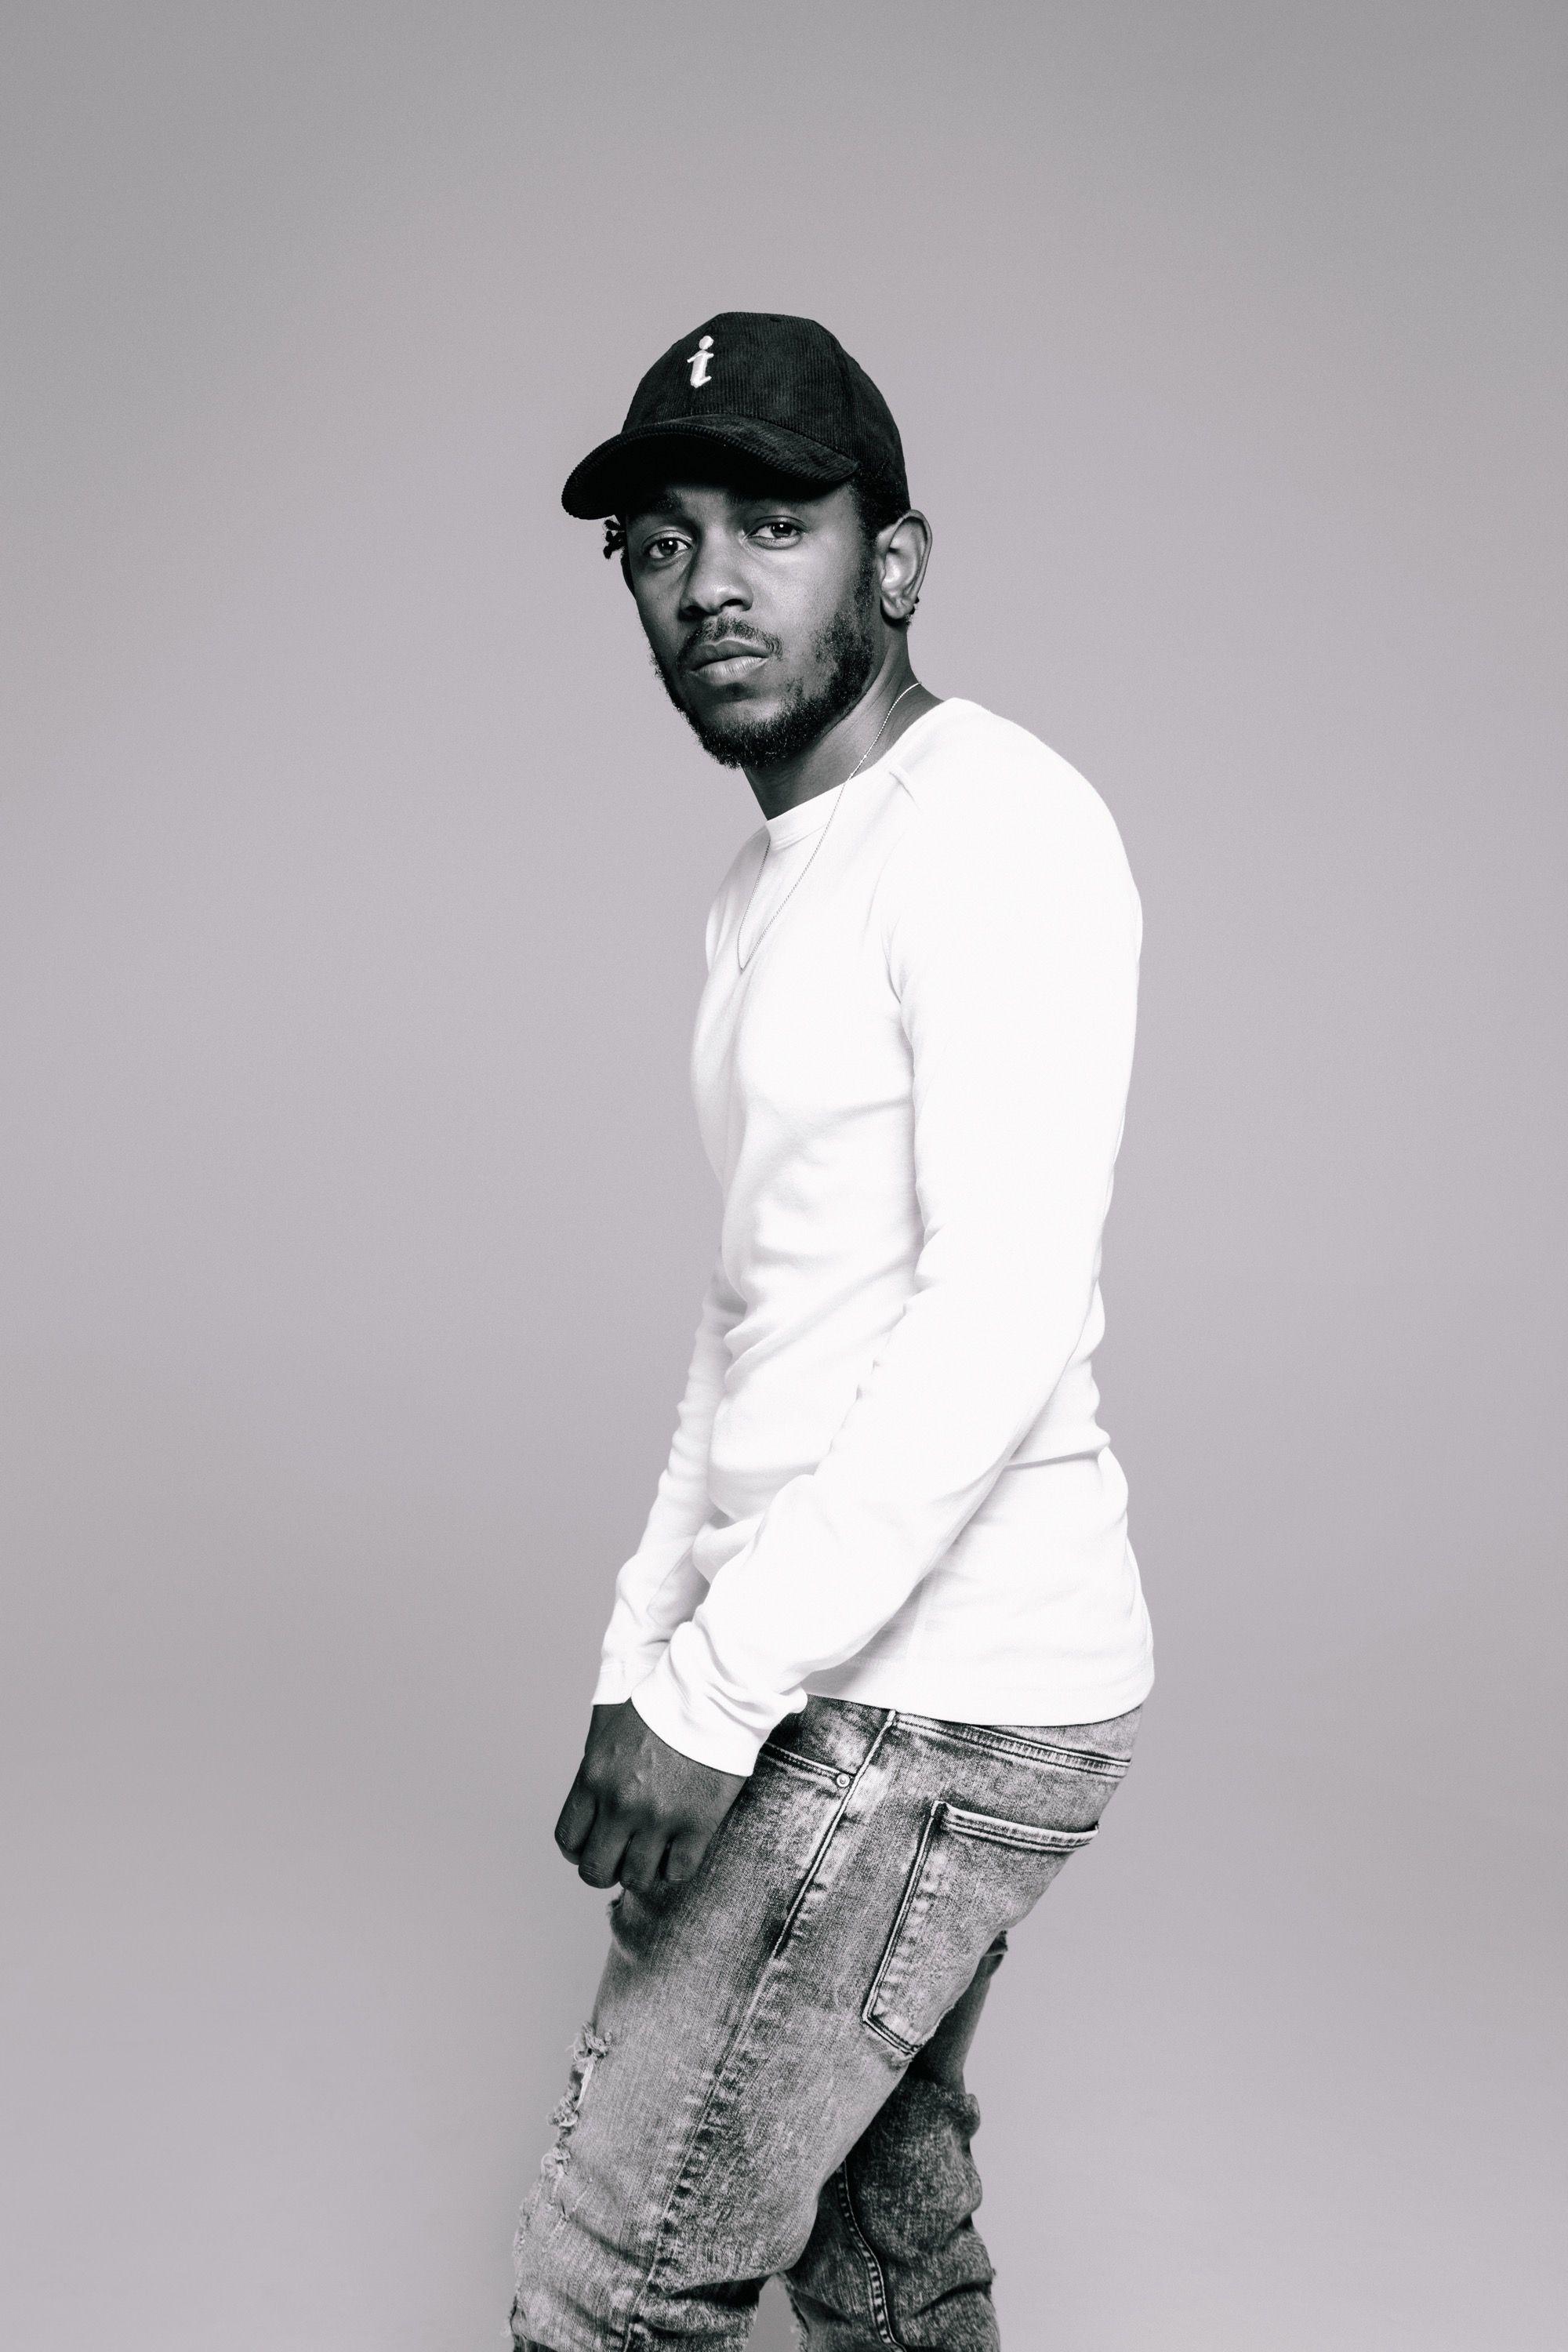 Five Reasons Why Kendrick Lamar's 'To Pimp A Butterfly' Deserves